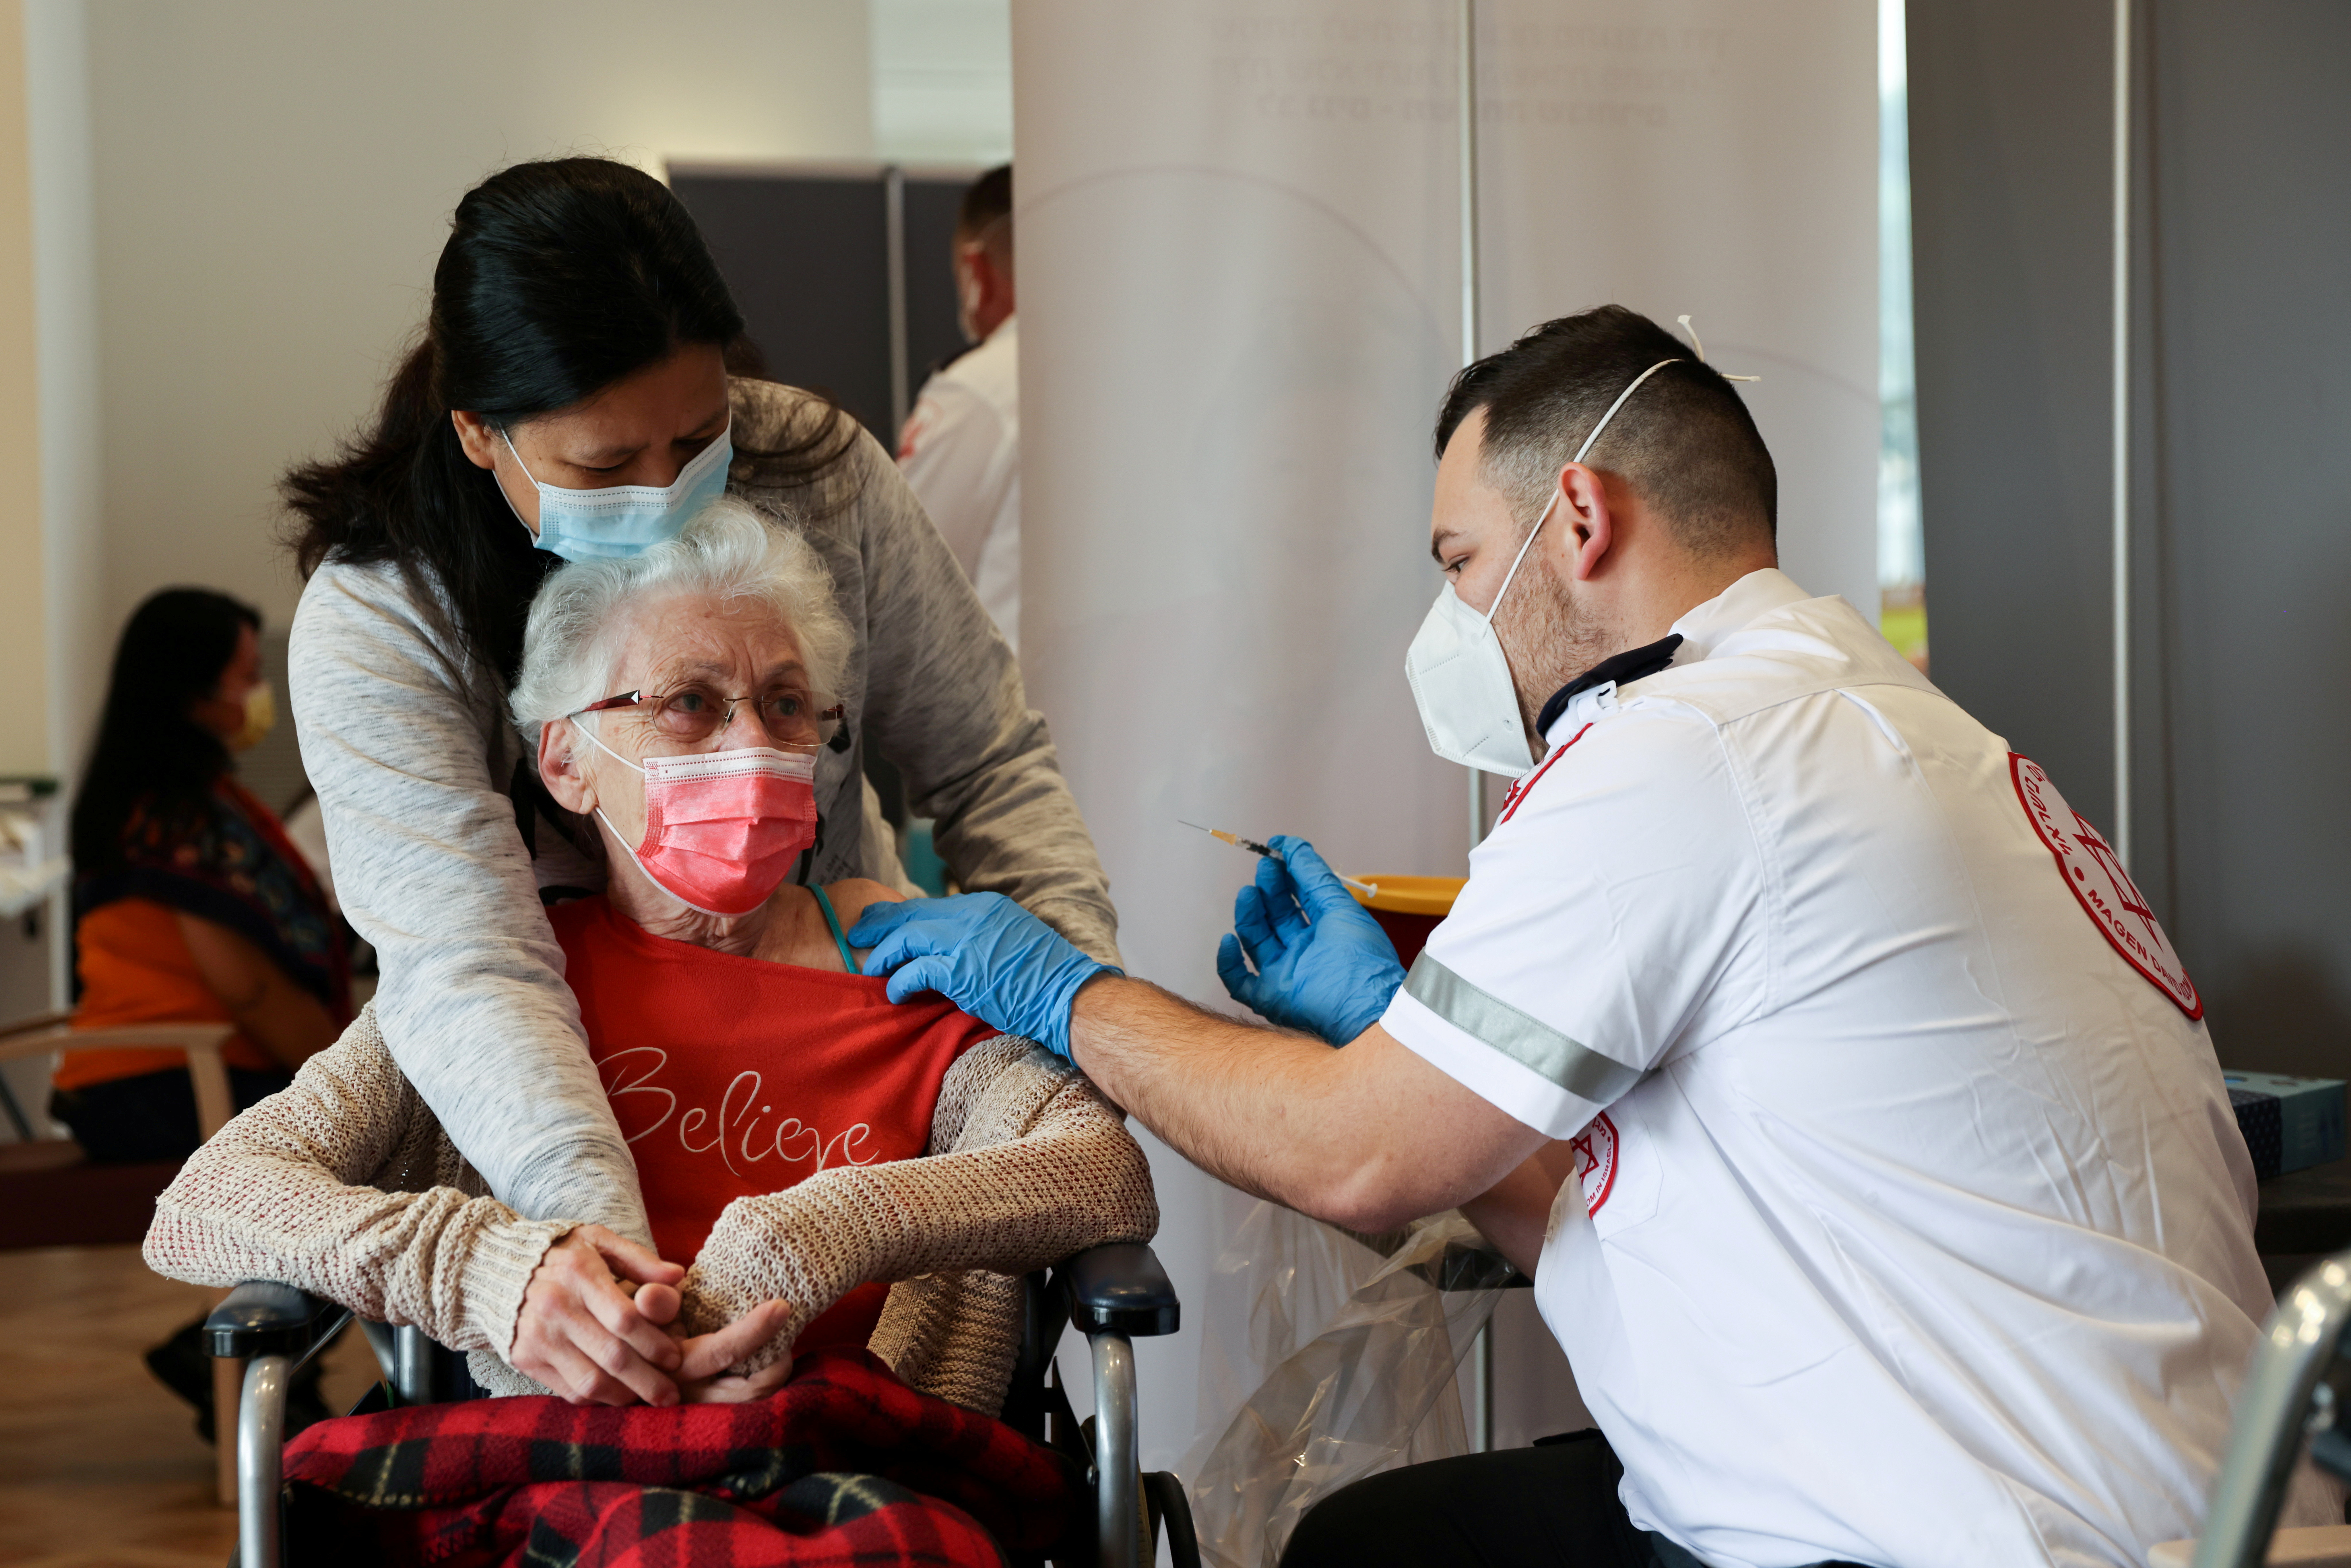 A elderly woman receives a booster shot of her vaccination against the coronavirus disease (COVID-19) at an assisted living facility, in Netanya, Israel January 19, 2021. REUTERS/Ronen Zvulun/File Photo